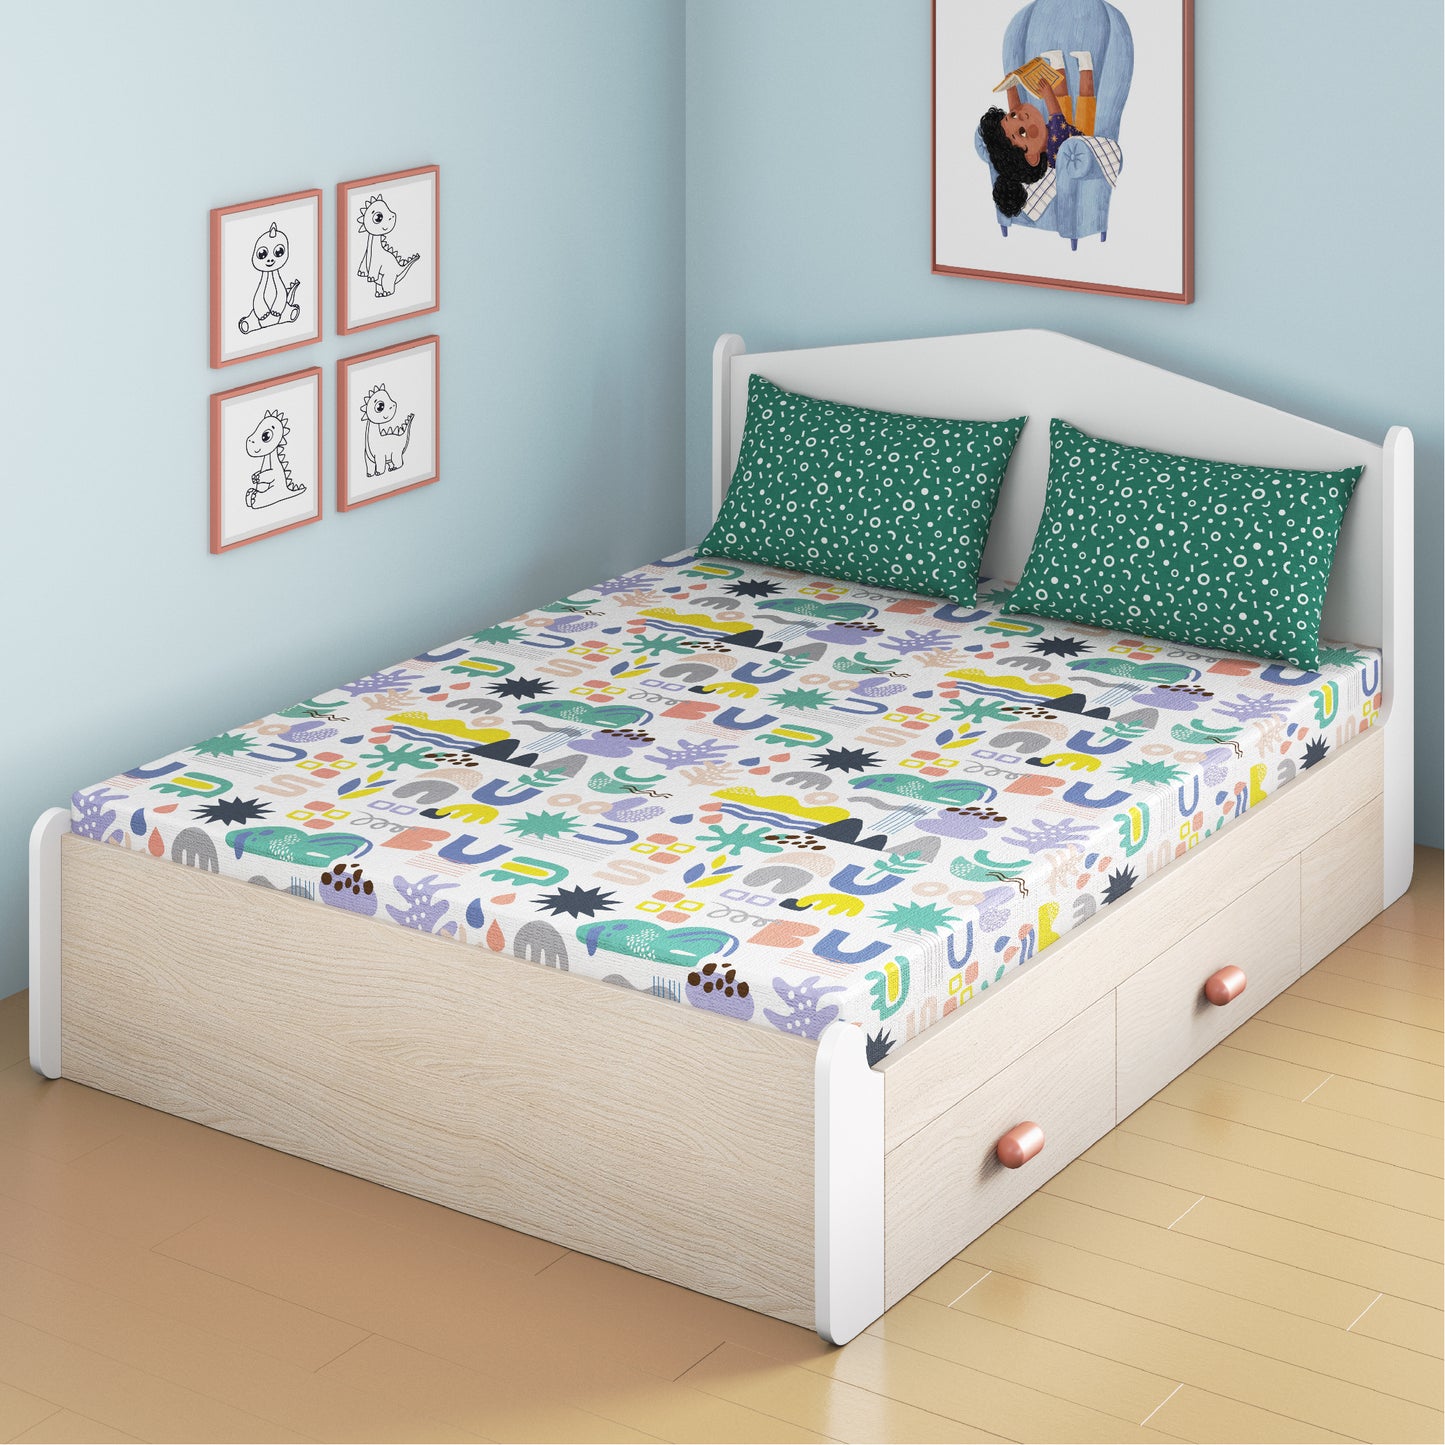 Oodles of Doodles Fitted Bedsheet